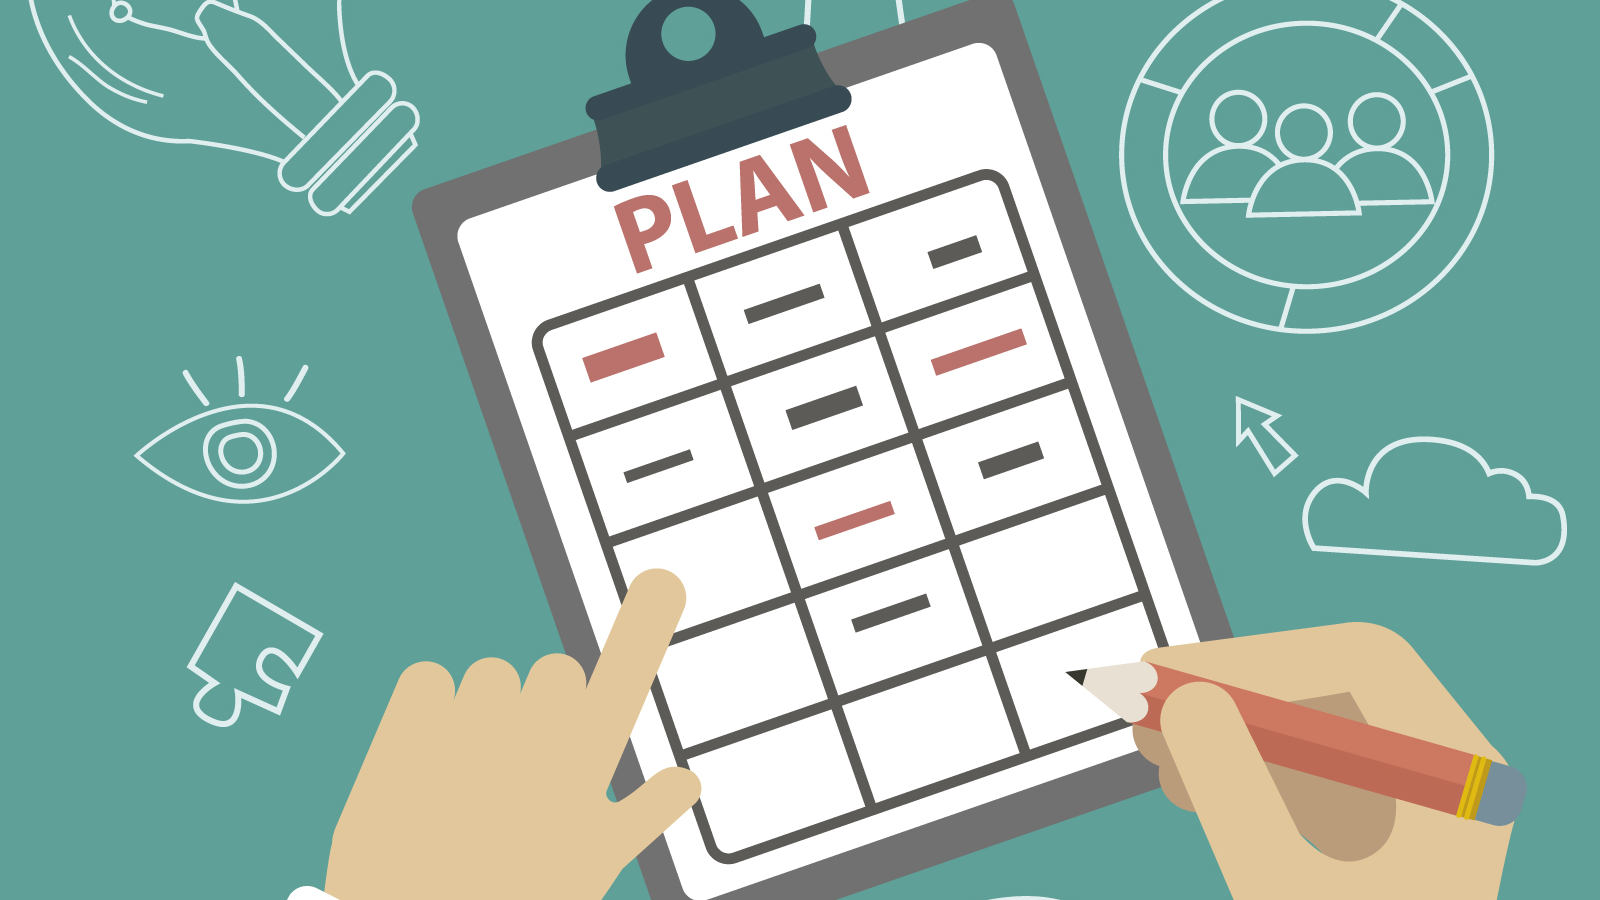 Life planning helps shift focus from returns to life